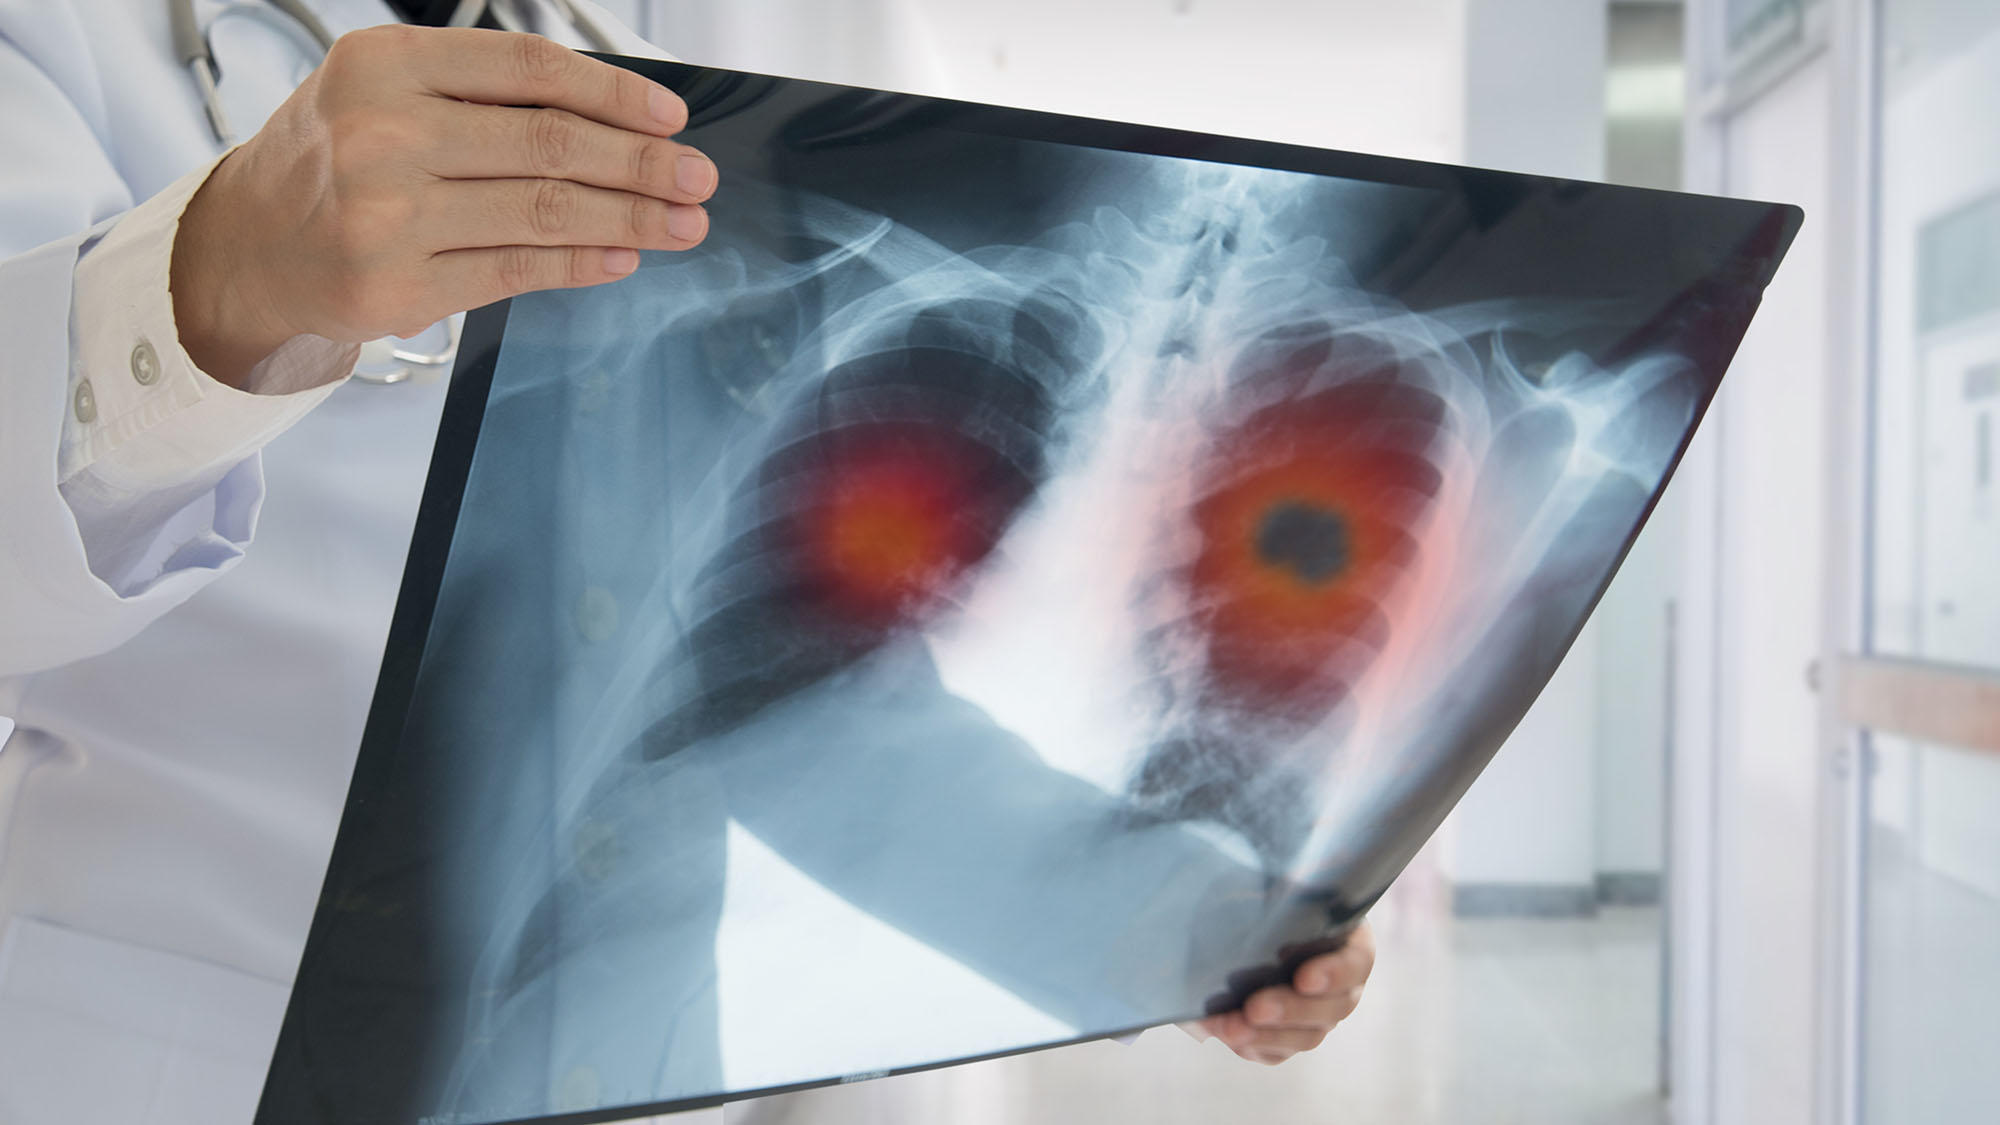 10 Myths About Lung Cancer Debunked by a Thoracic Surgeon